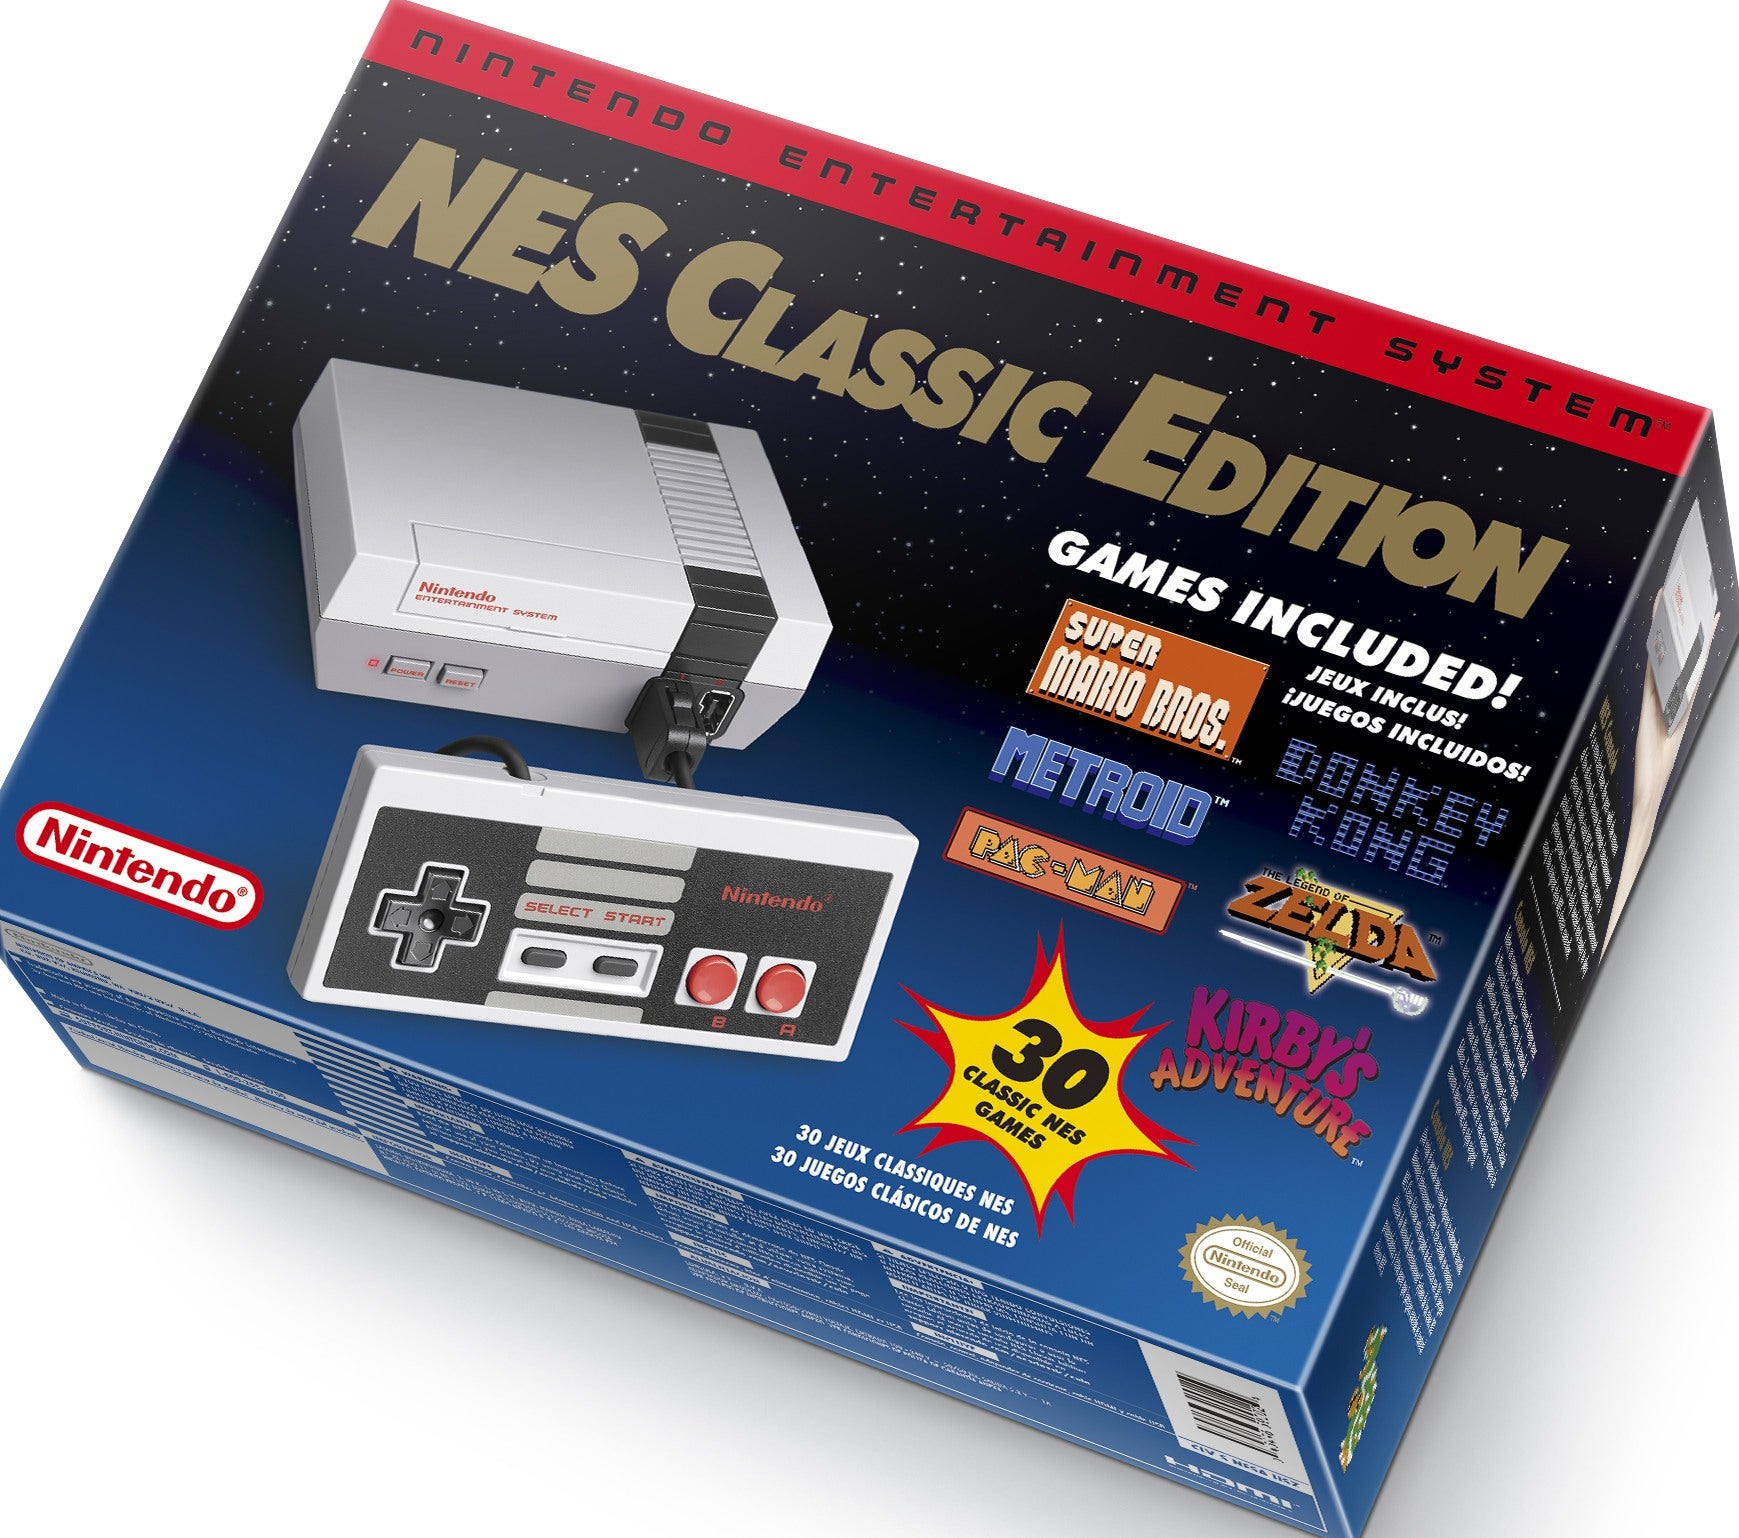 The NES Classic Edition box, with several built-in games listed.